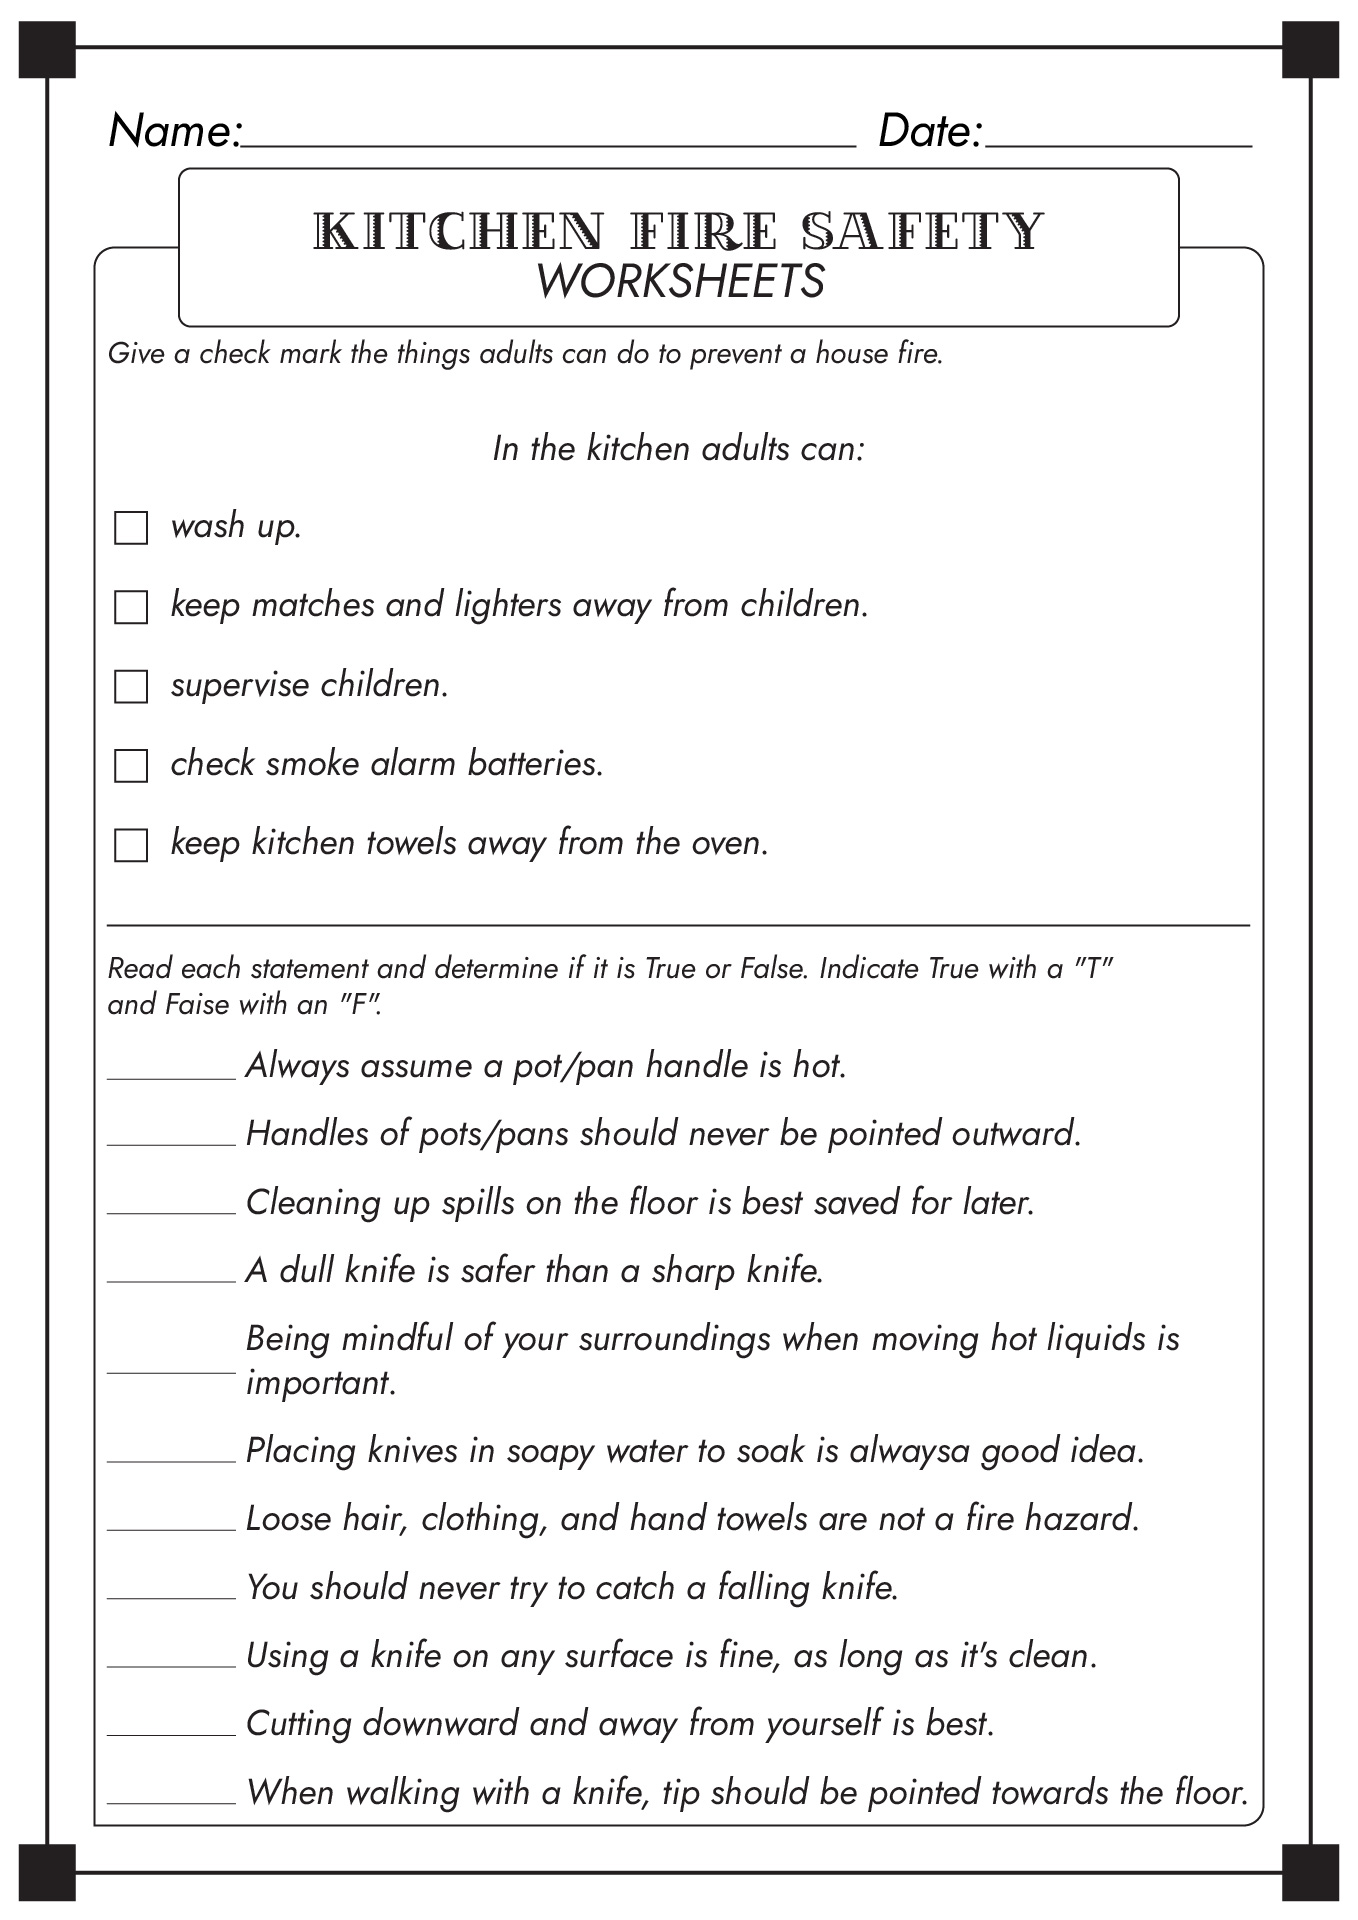 safety-in-the-kitchen-worksheets-free